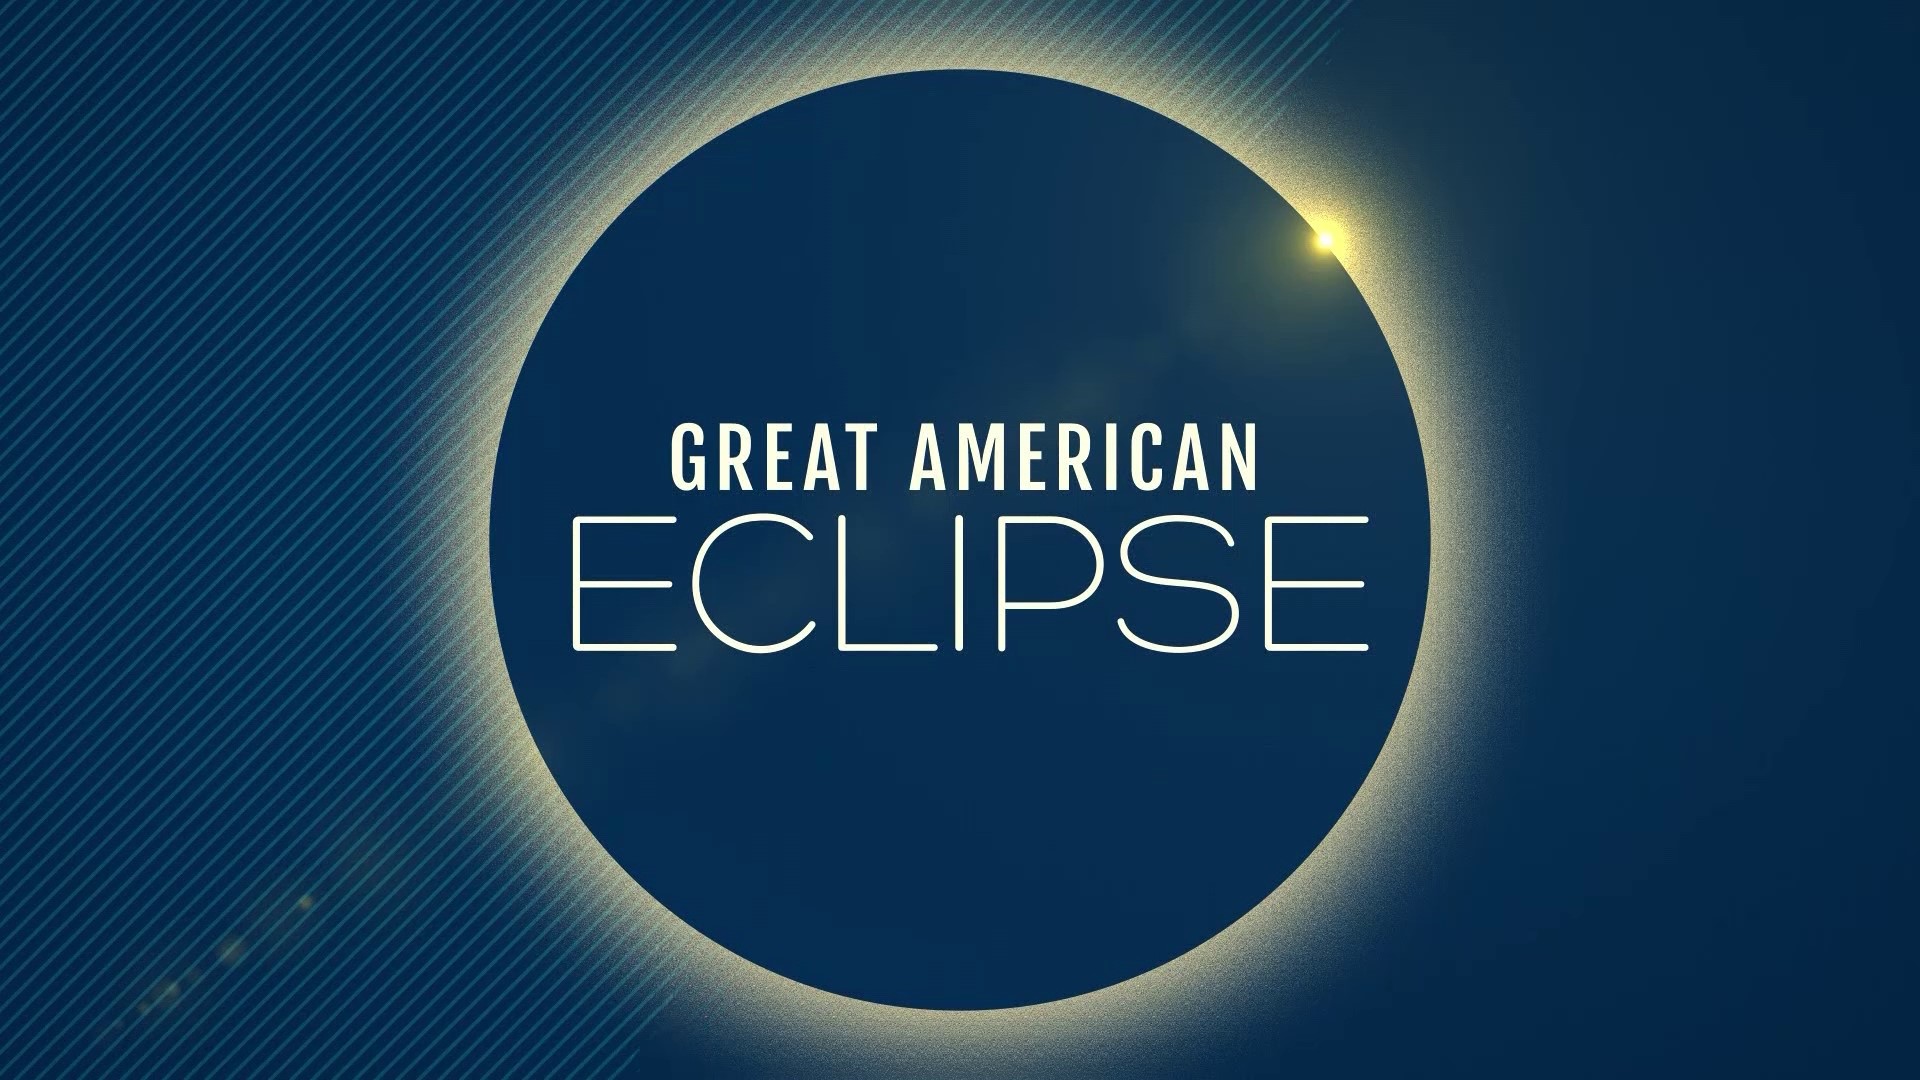 Join the NEWS CENTER Maine team as they distribute throughout Maine to bring you the Great American Eclipse experience.